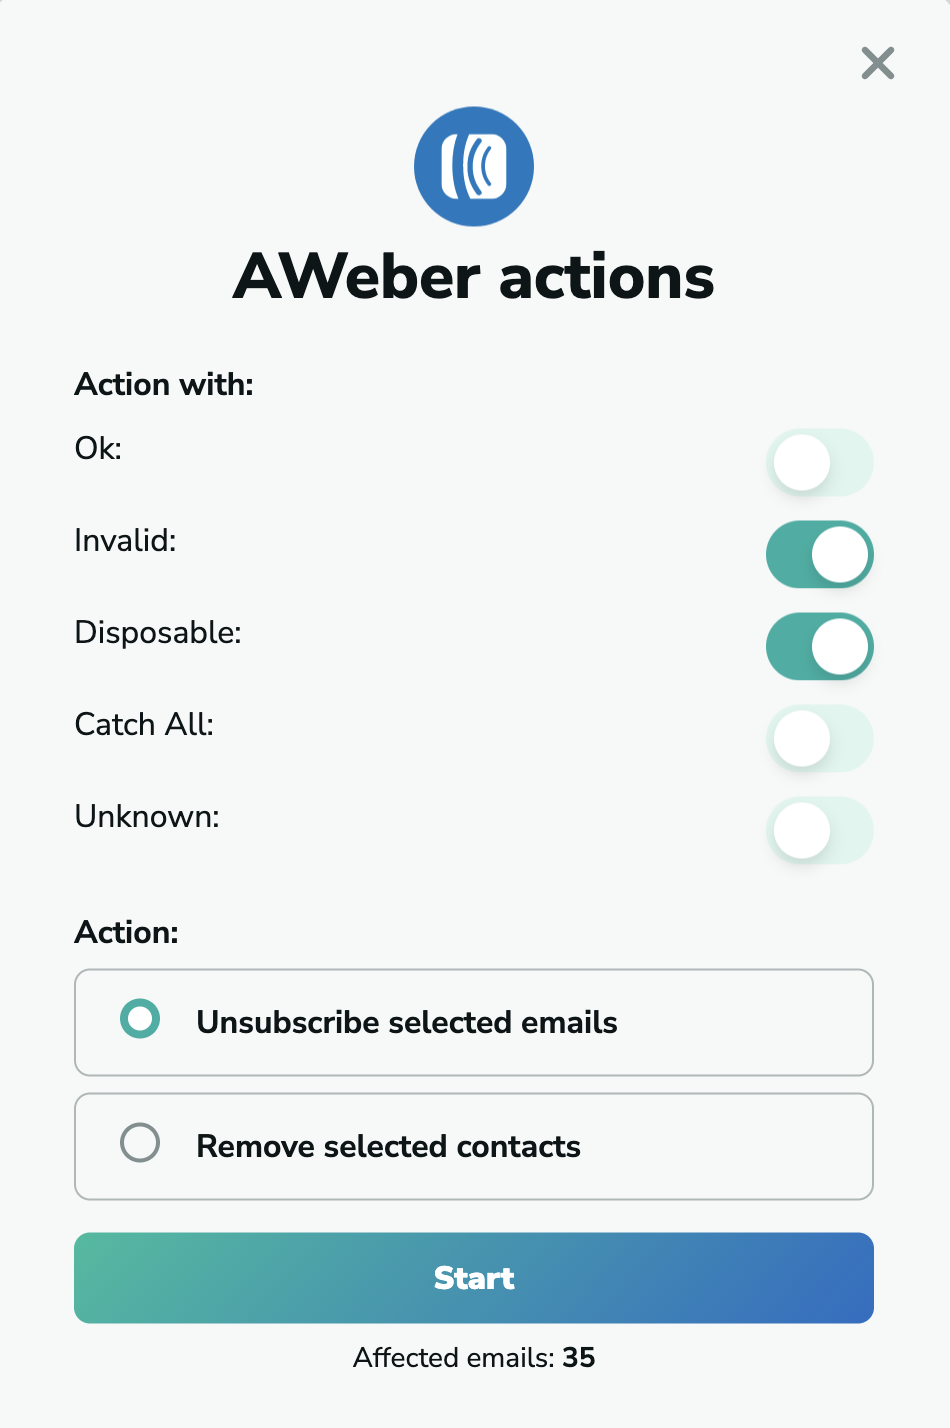 AWeber unsubscribe emails in MillionVerifier